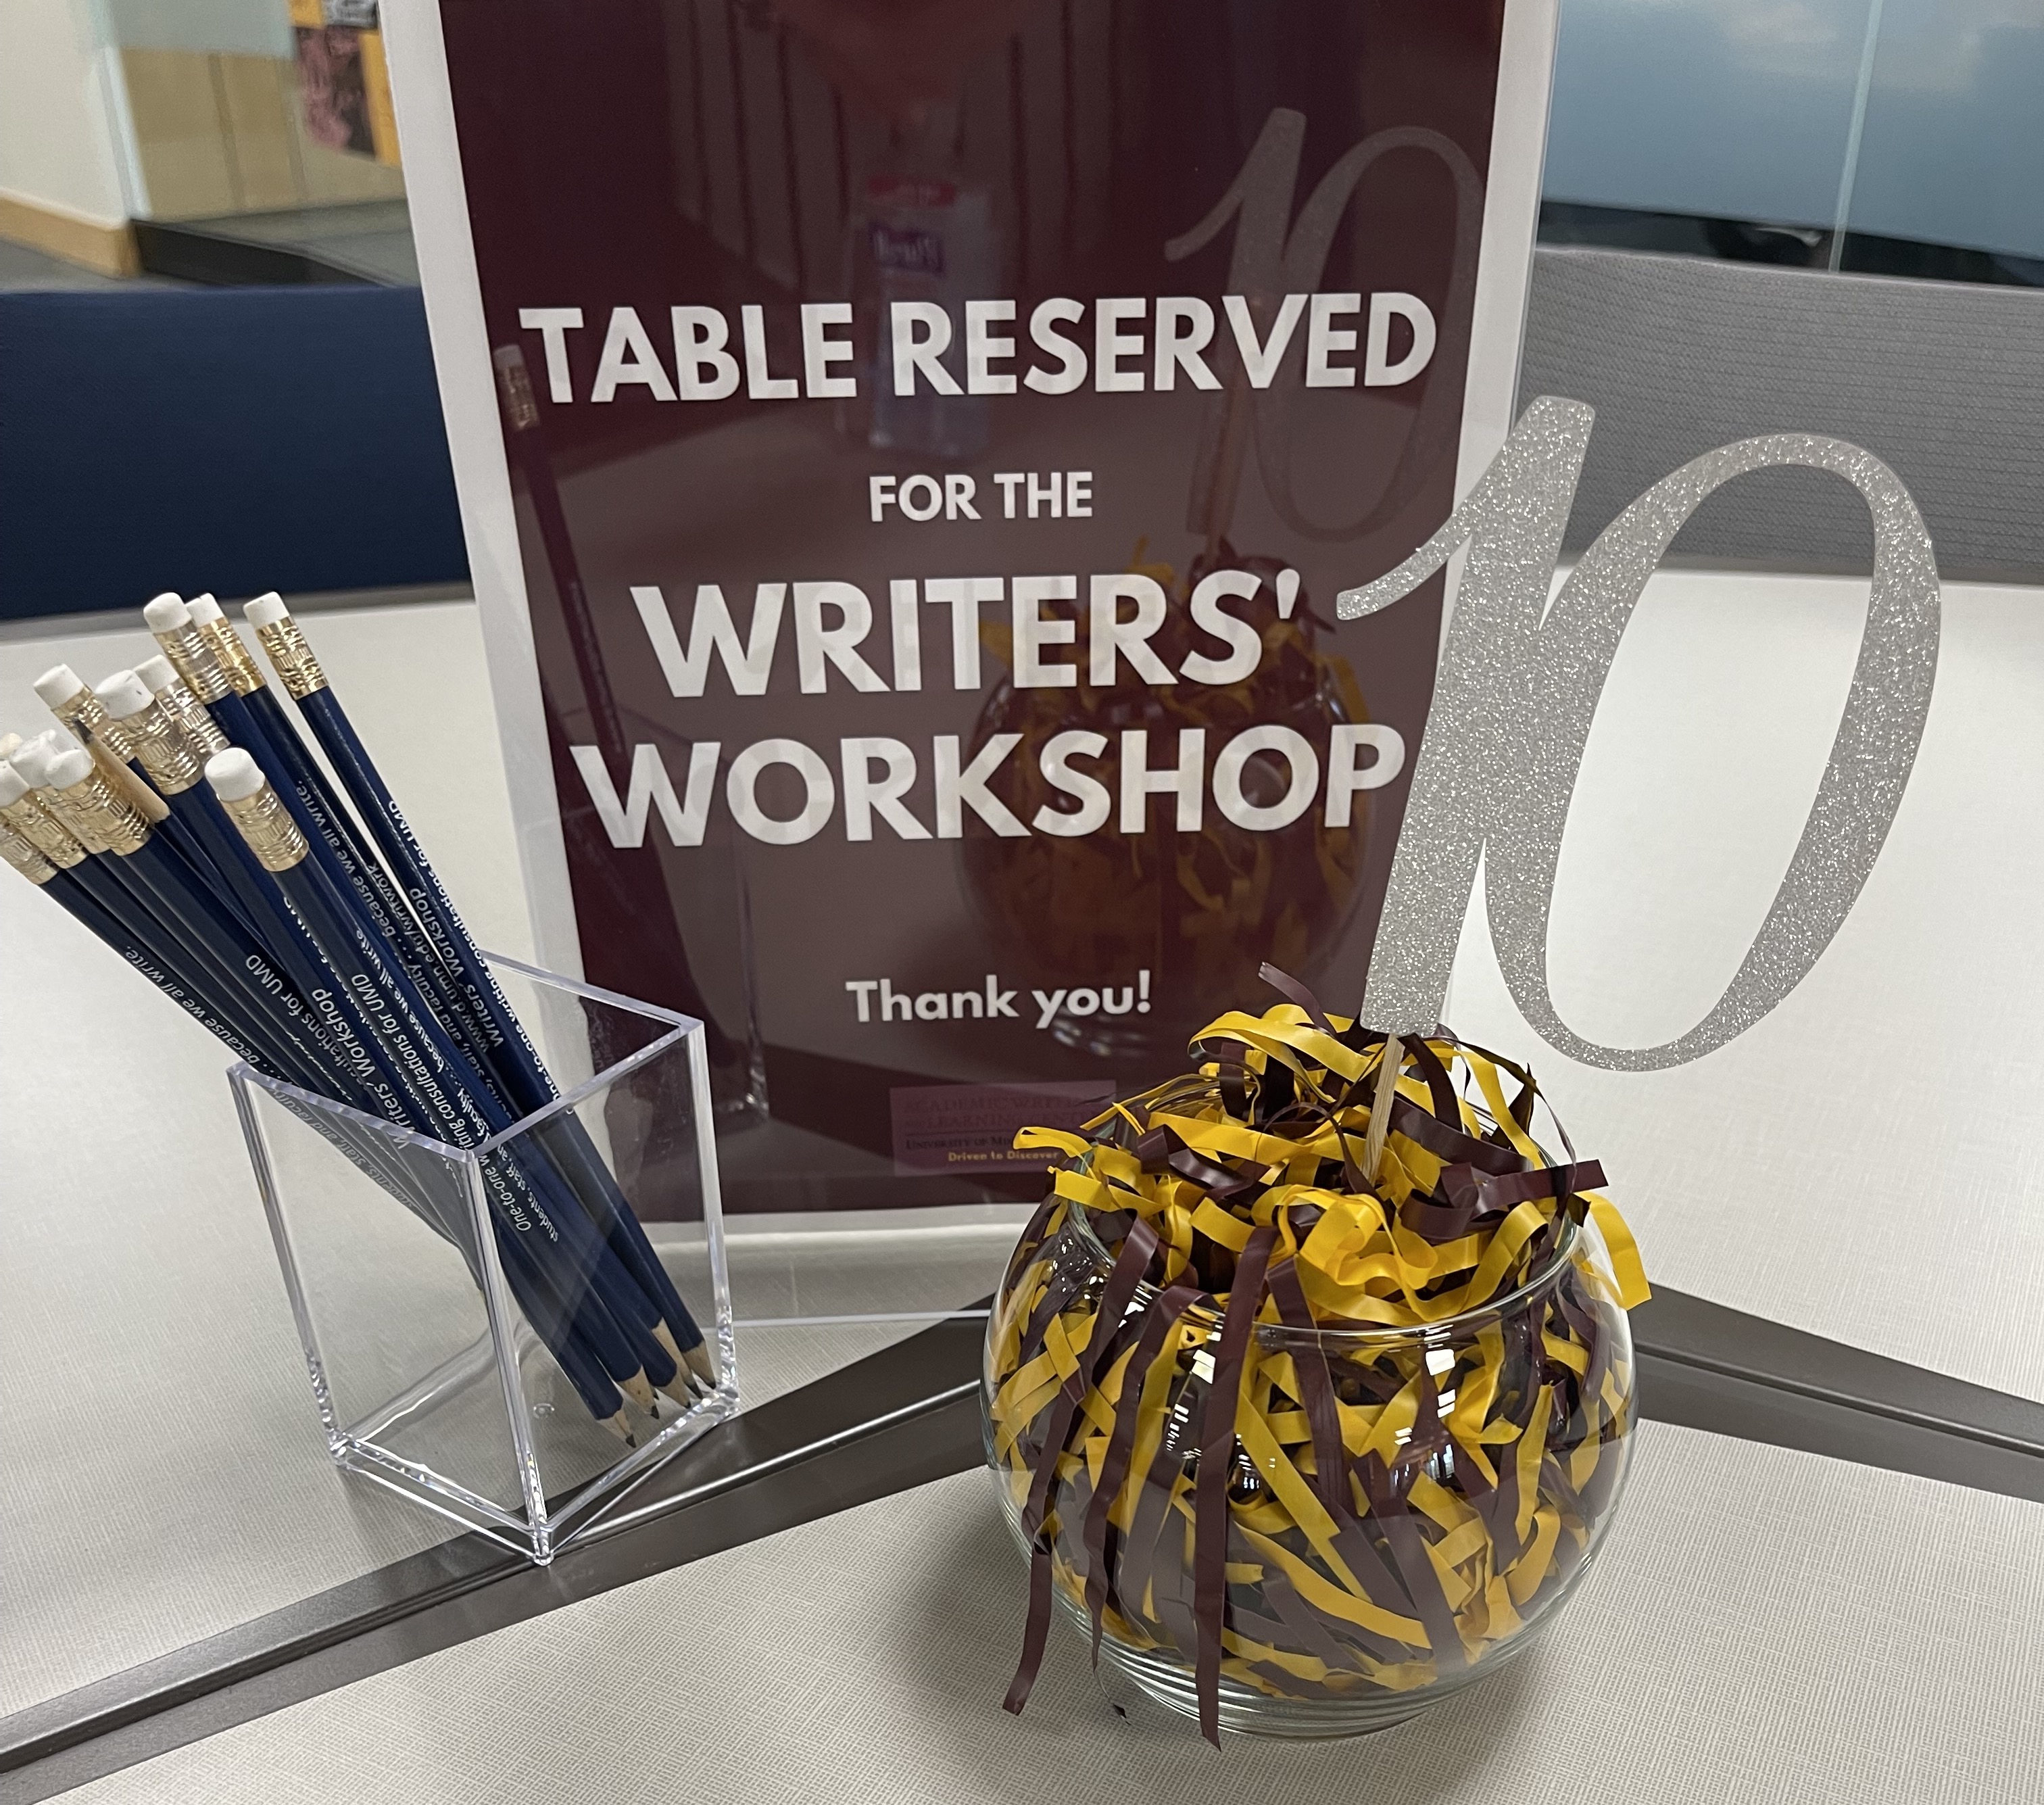 maroon table sign "table reserved for the Writers' Workshop" alongside a cup full of pencils